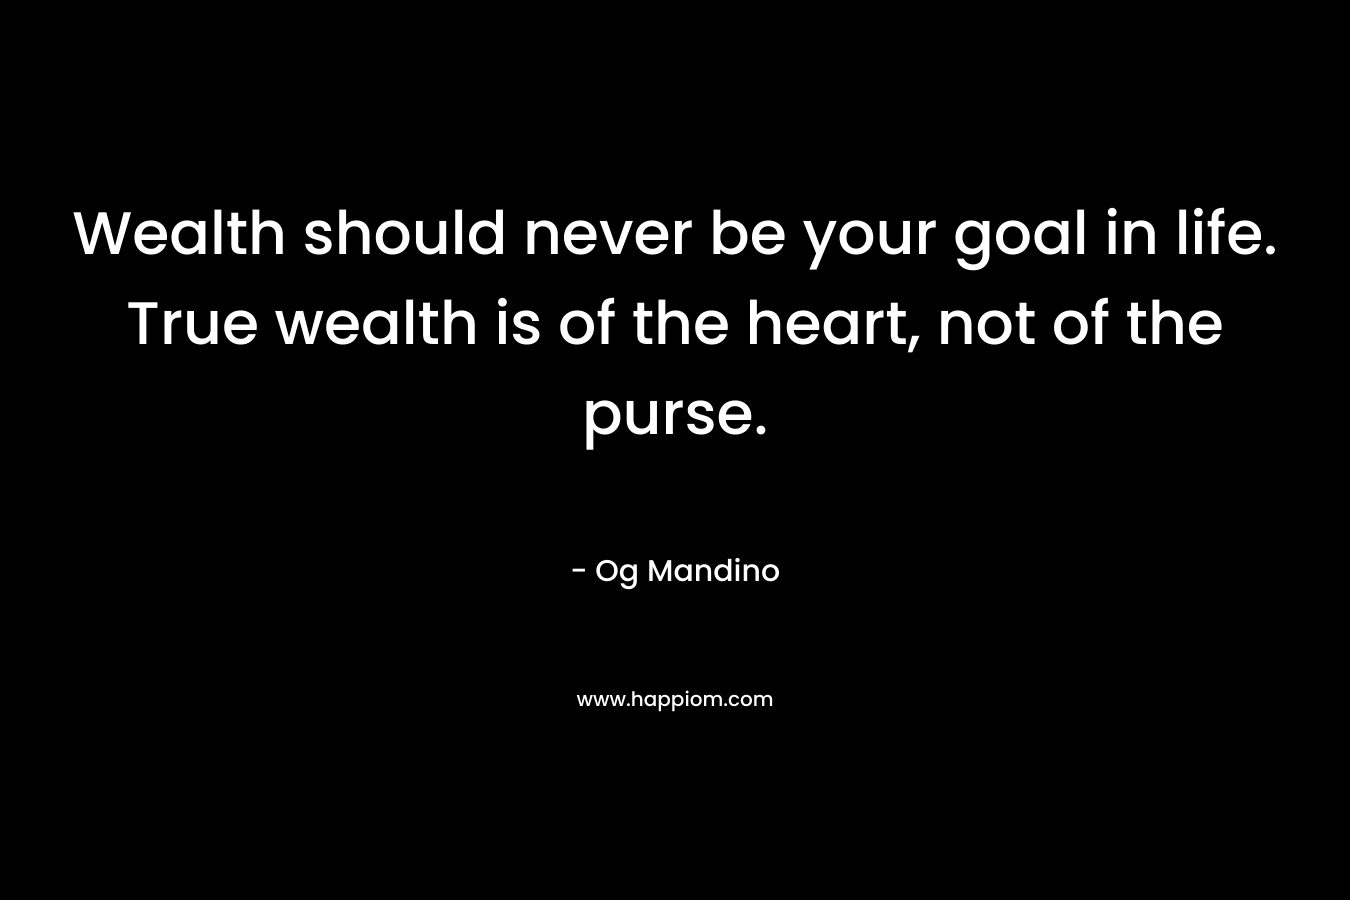 Wealth should never be your goal in life. True wealth is of the heart, not of the purse.